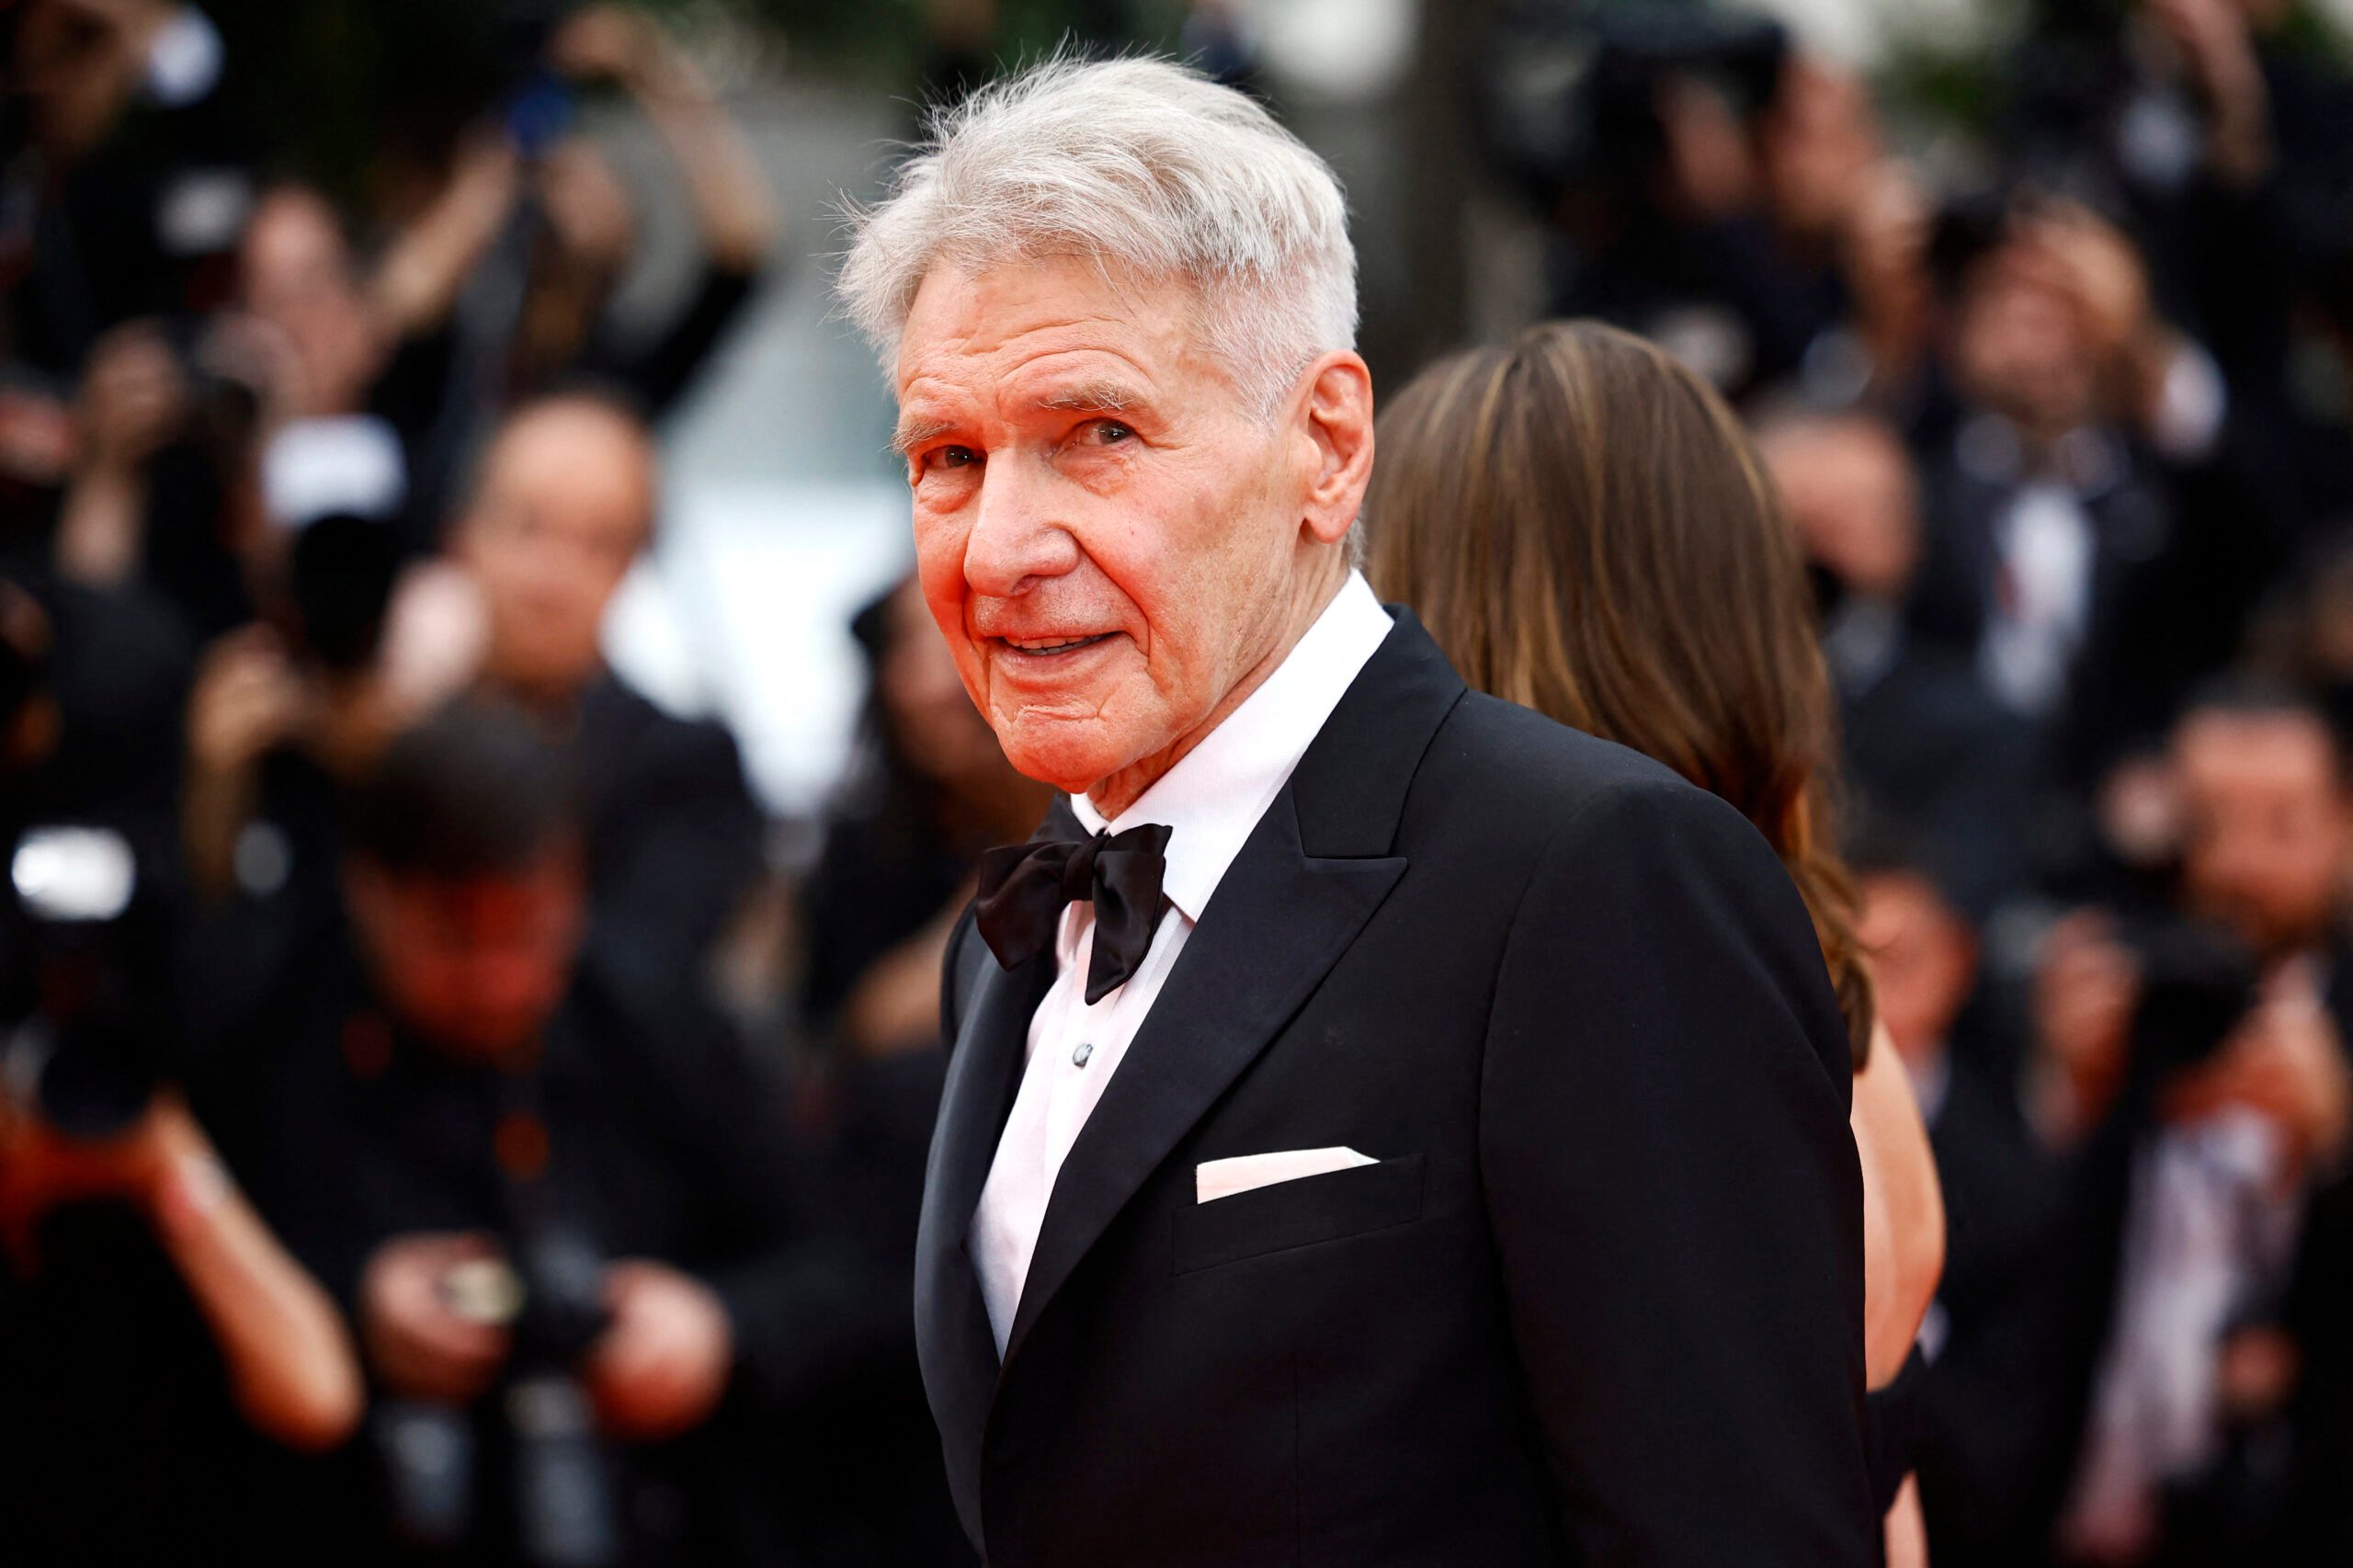 The bullwhip is back Harrison Ford in Cannes for 'Indiana Jones' premiere